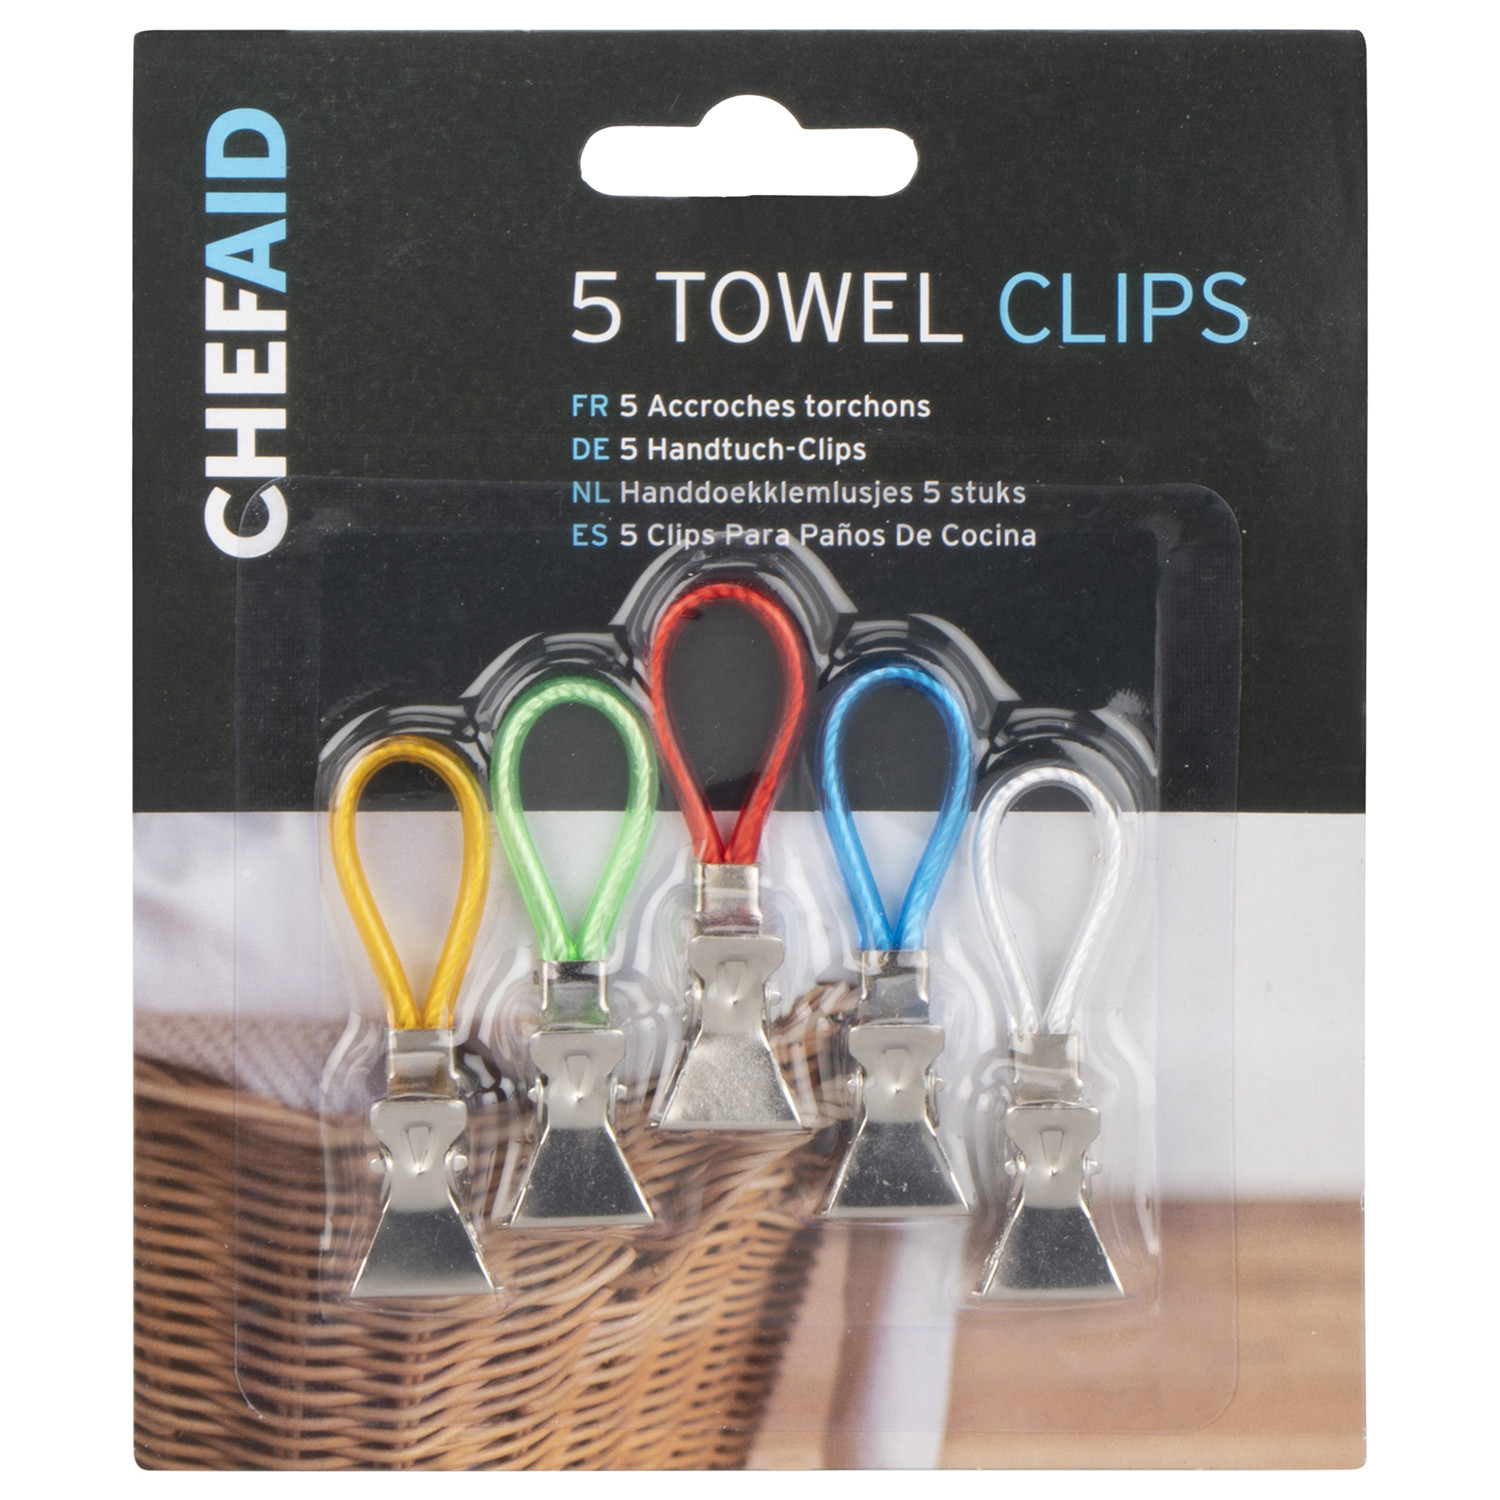 Pack of 5 Towel Clips Image